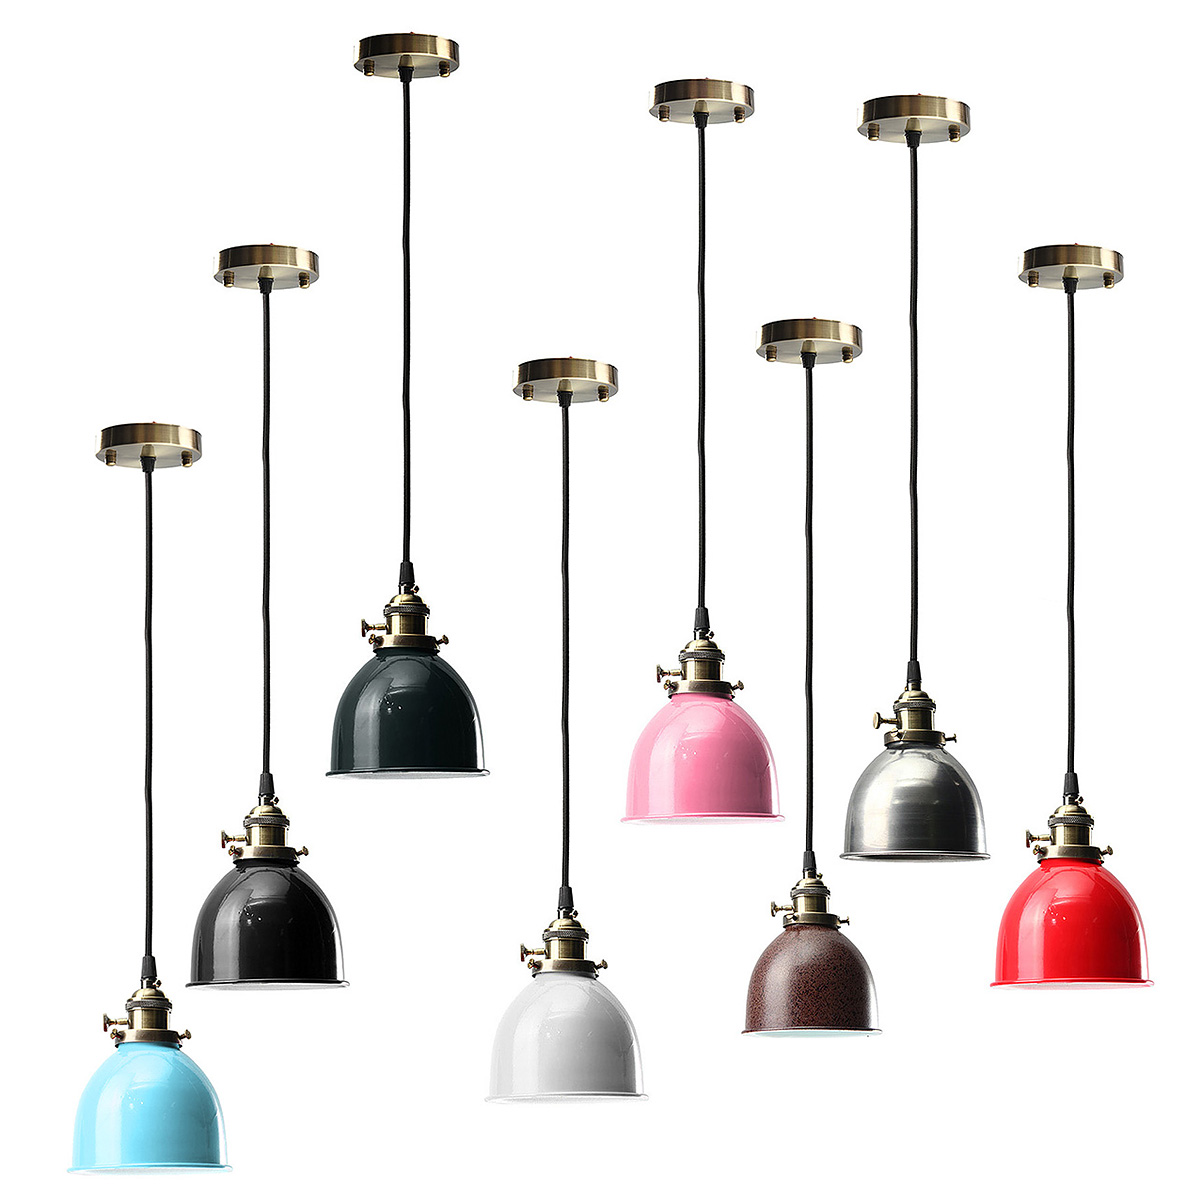 Find E27 Vintage Retro Hanging Pendant Light Ceiling Lamp Shade Fixture Lampshade for Sale on Gipsybee.com with cryptocurrencies